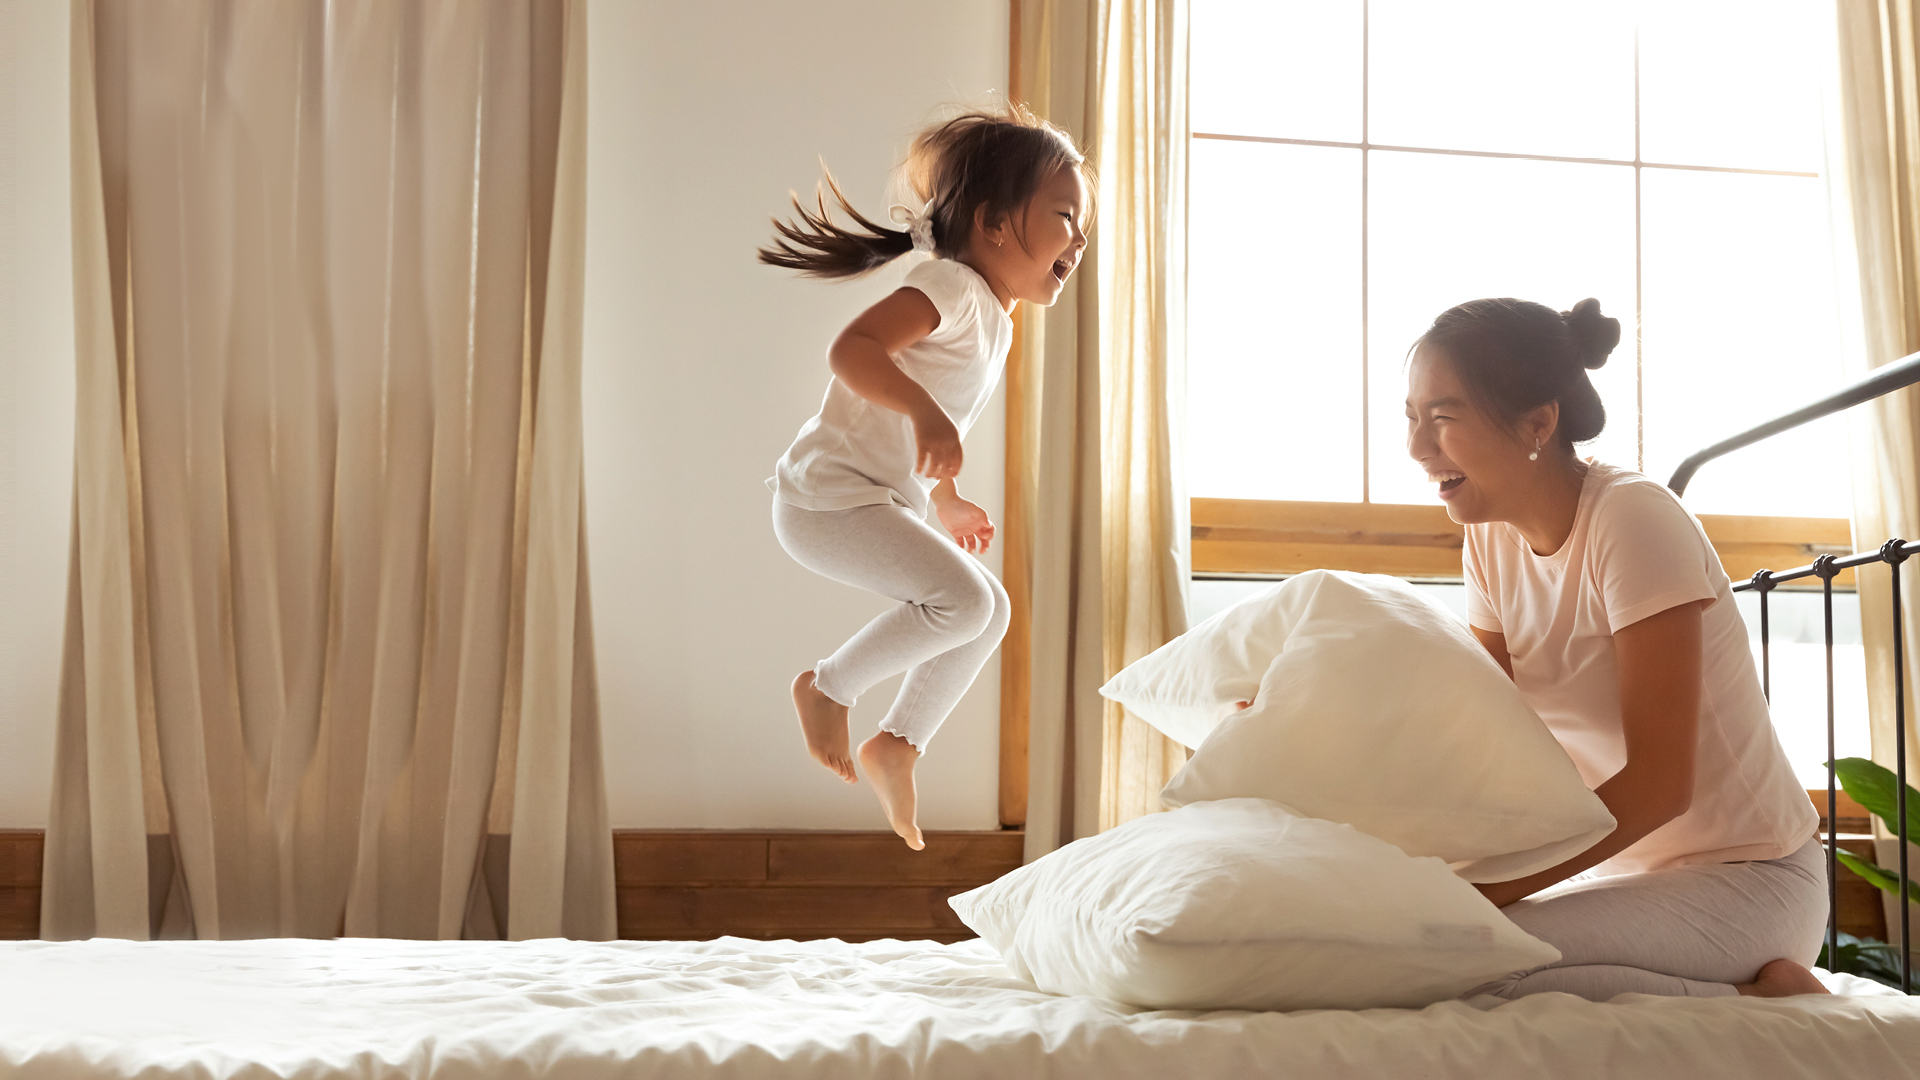 Mother laughs as daughter jumps on bed.